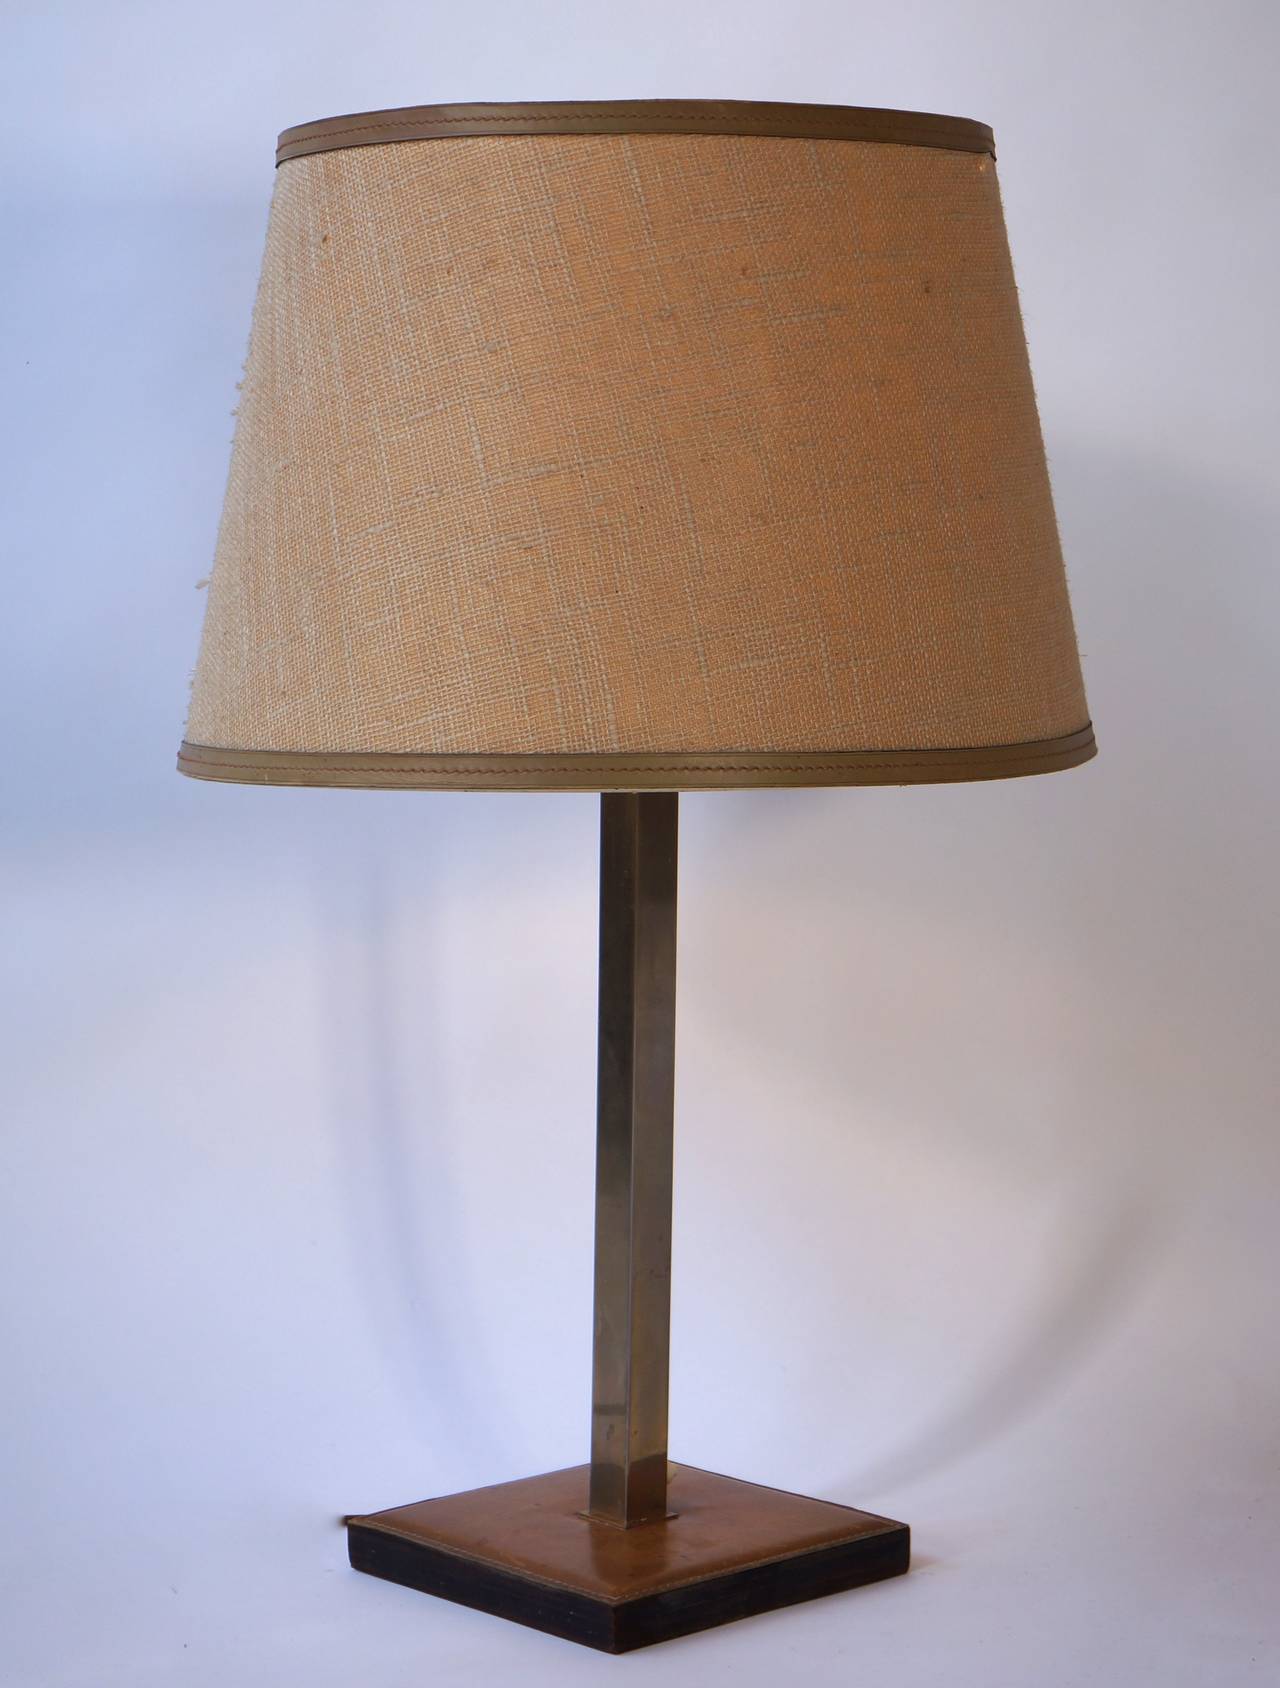 Table lamp designed by Delvaux.
Manufactured in Belgium around 1960.
Leather base, chromed structure and fabric shade.

In good original condition, with minor wear consistent with age and use, preserving a beautiful patina.